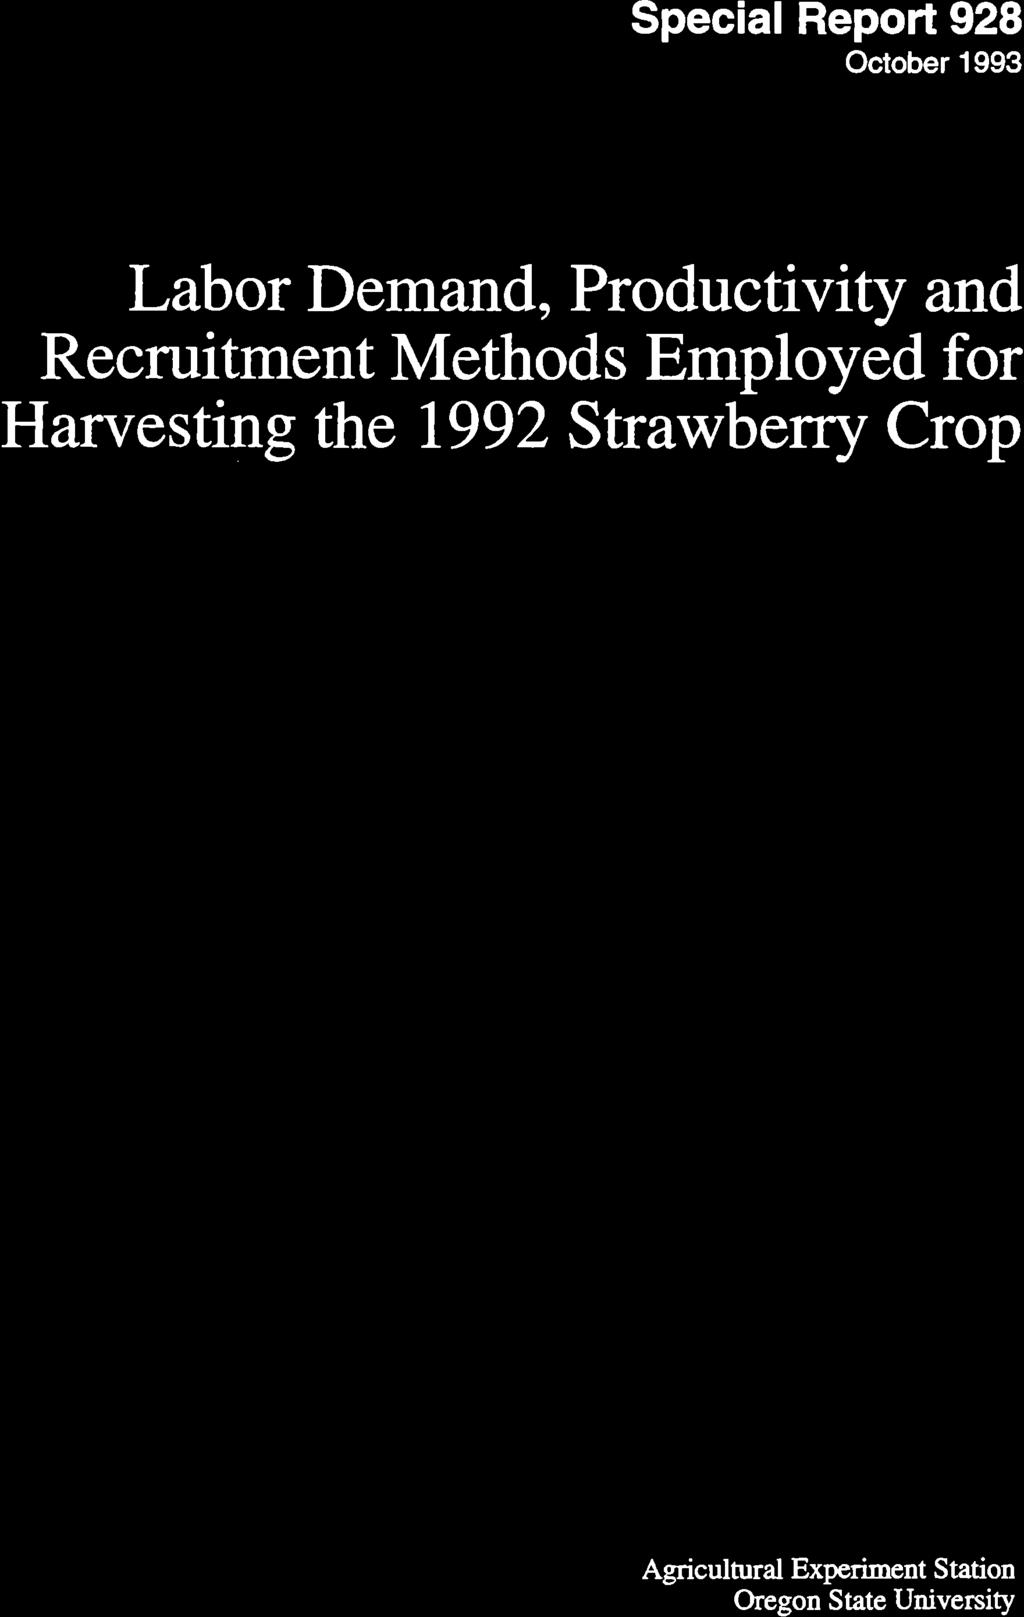 for Harvesting the 1992 Strawbeny Crop